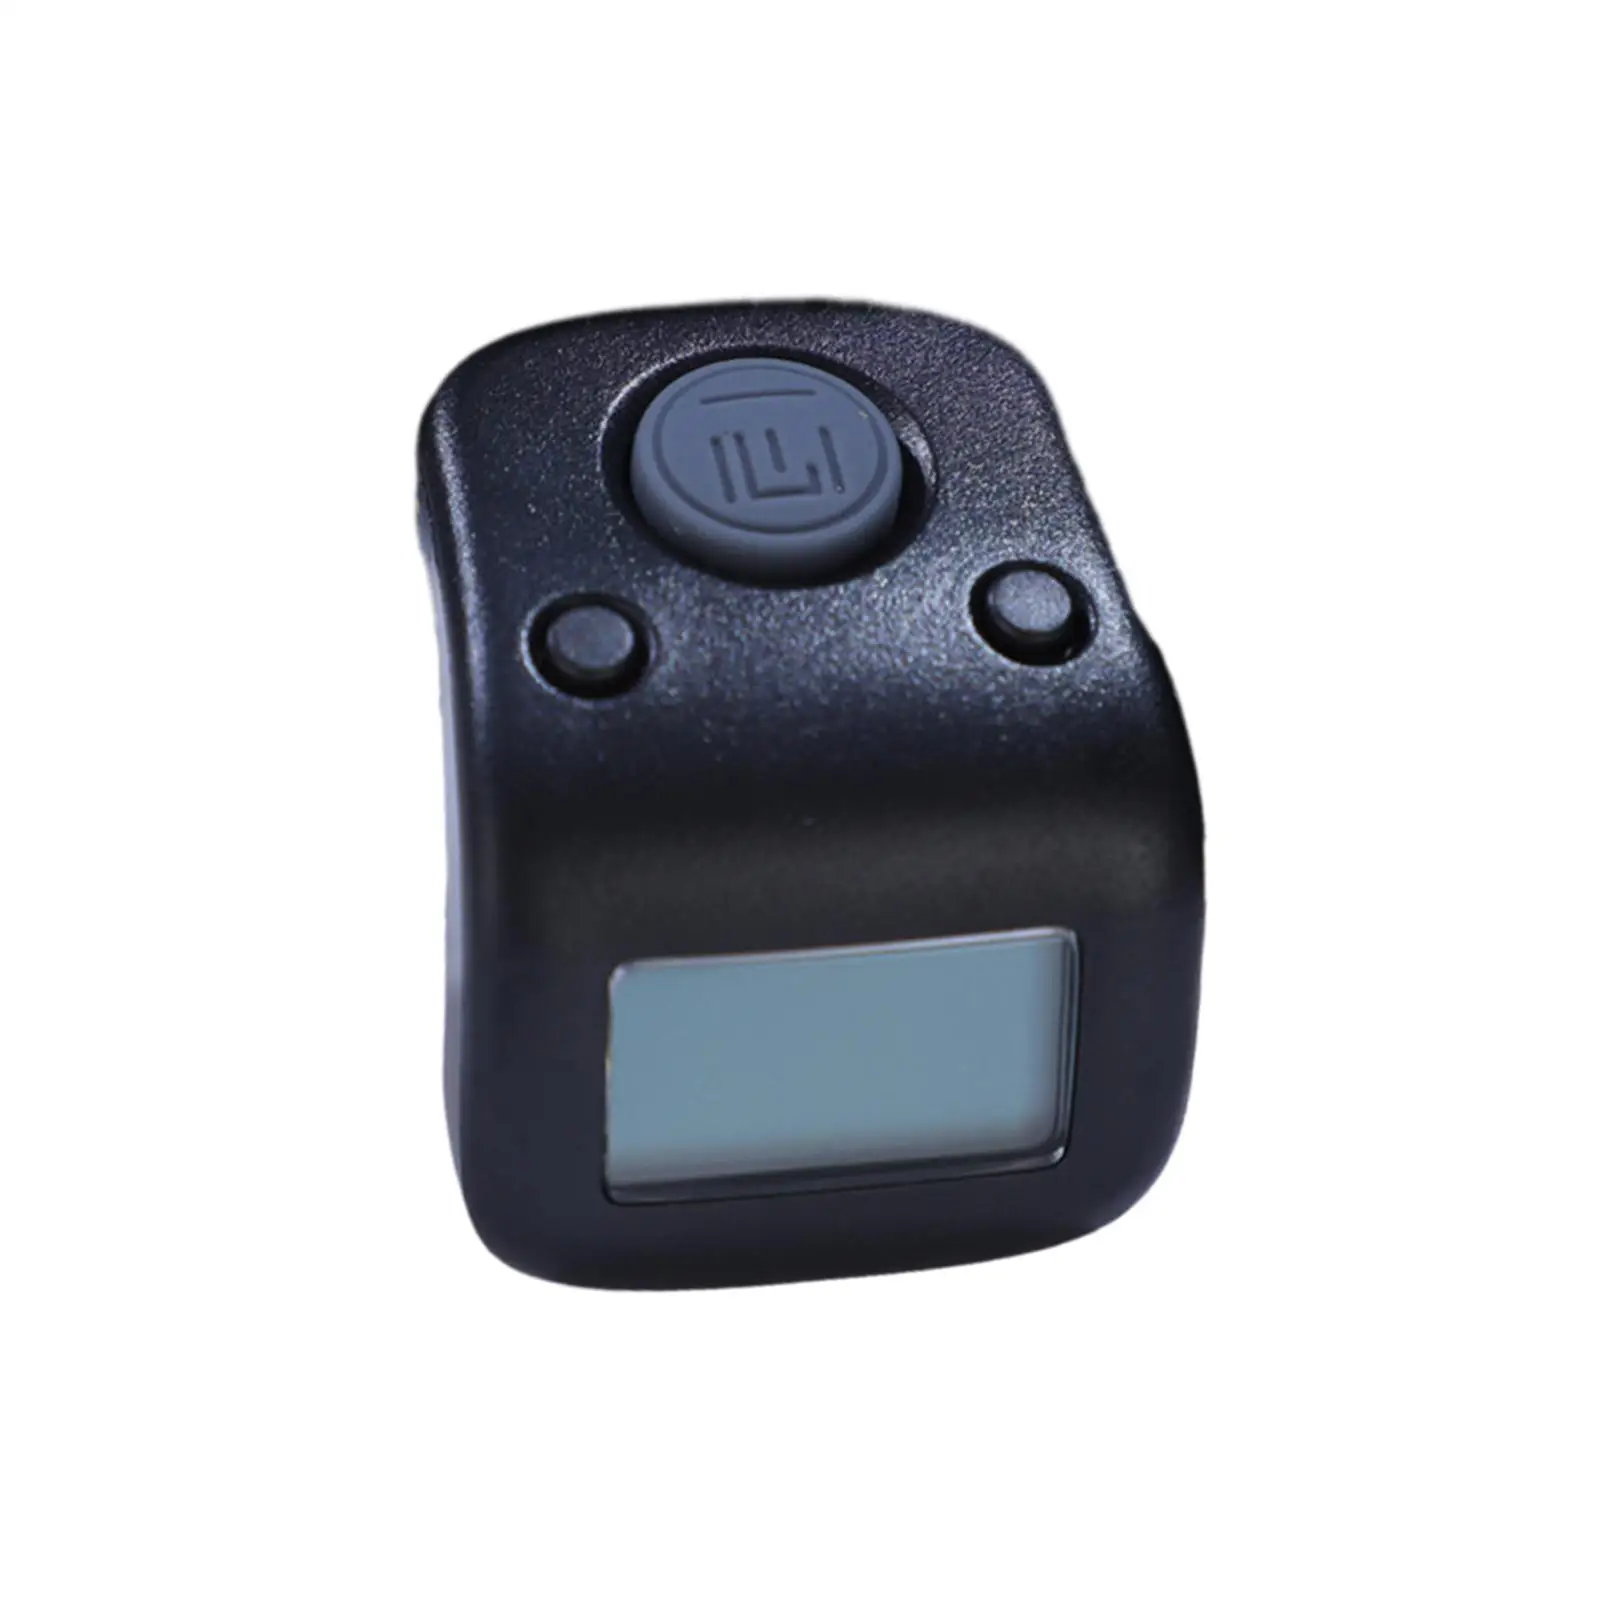 Electronic Finger Counter Mini Rechargeable Wearable Resettable Number Counter Clicker for Crochet Knitting Prayer Sports Stitch